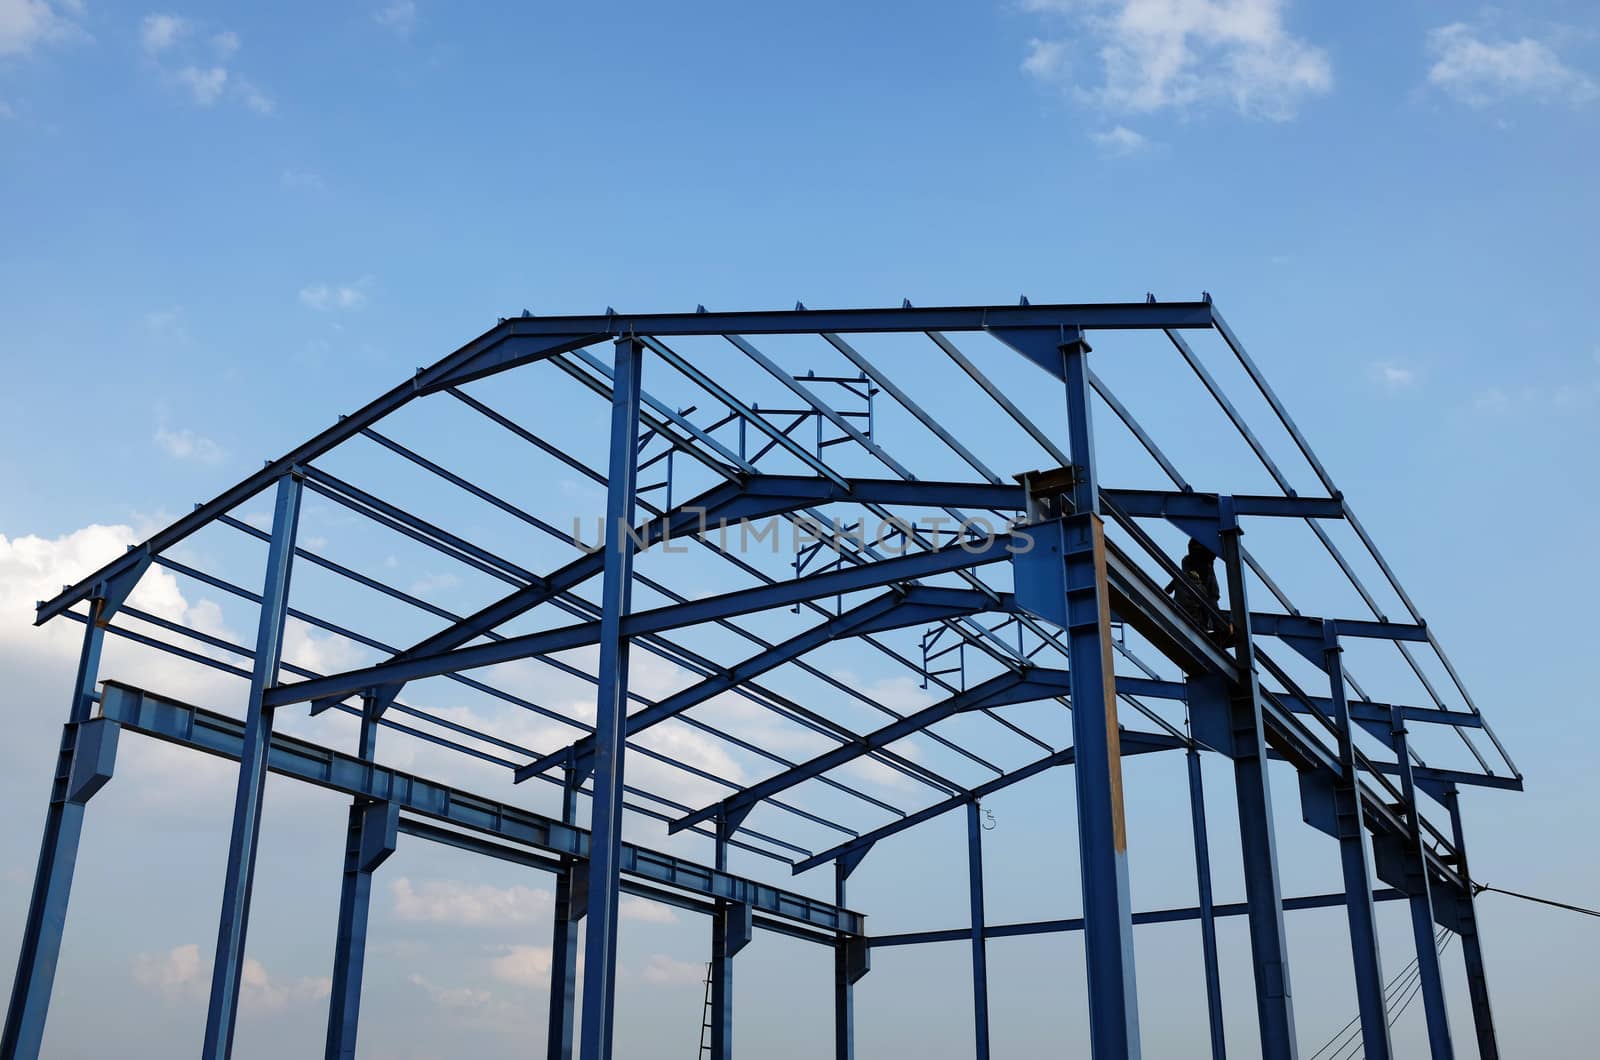 Steel frame of a new industrial building by photosoup